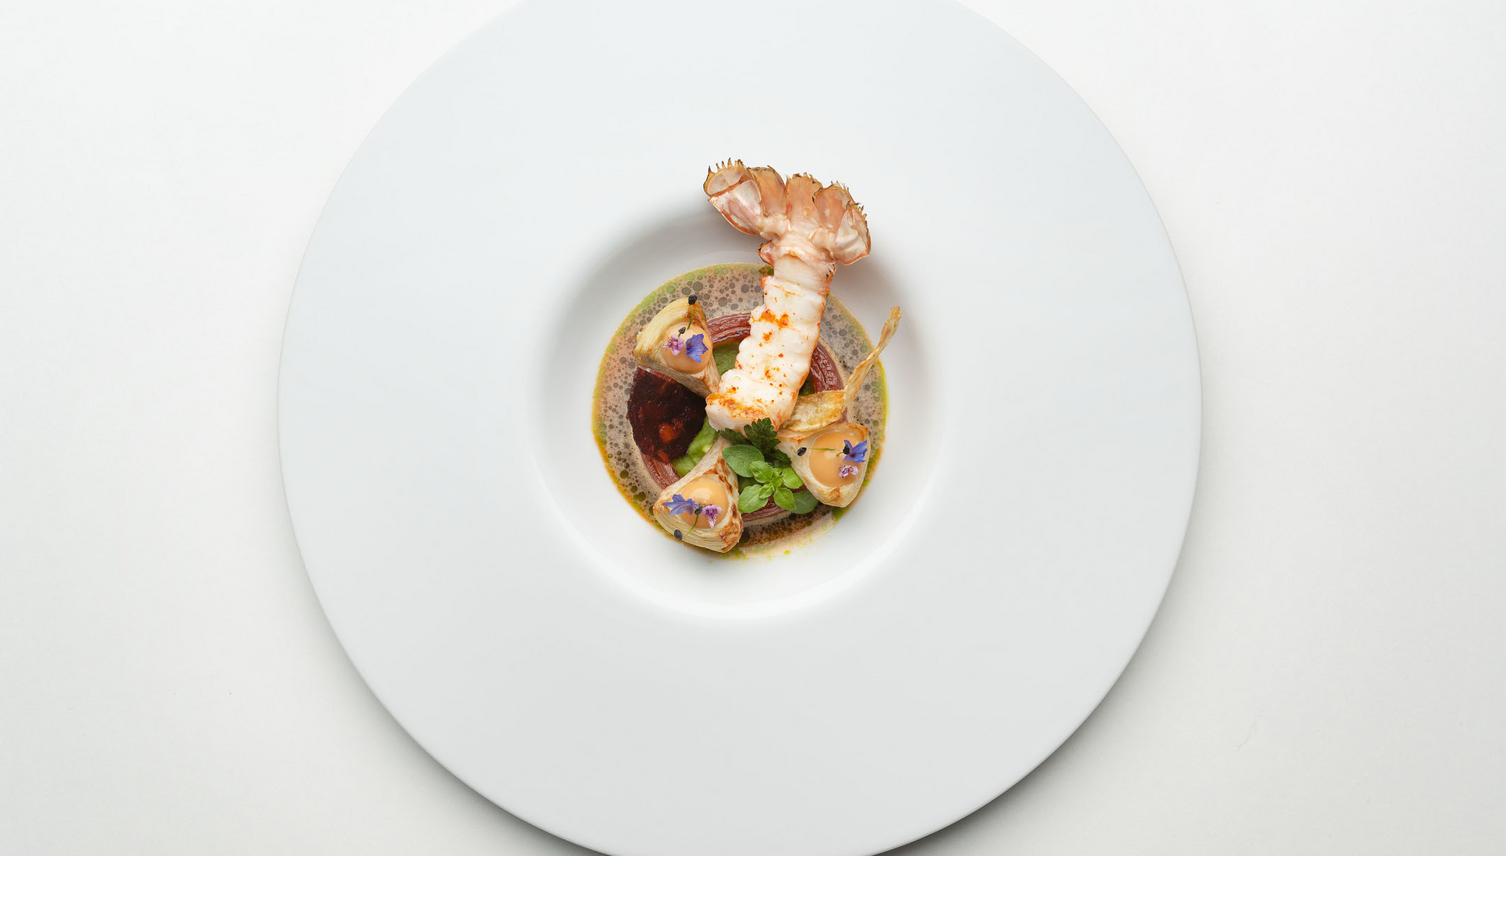 Restaurant Tipken's by Nils Henkel | Dish: Norway lobster with chorizo jus and artichokes